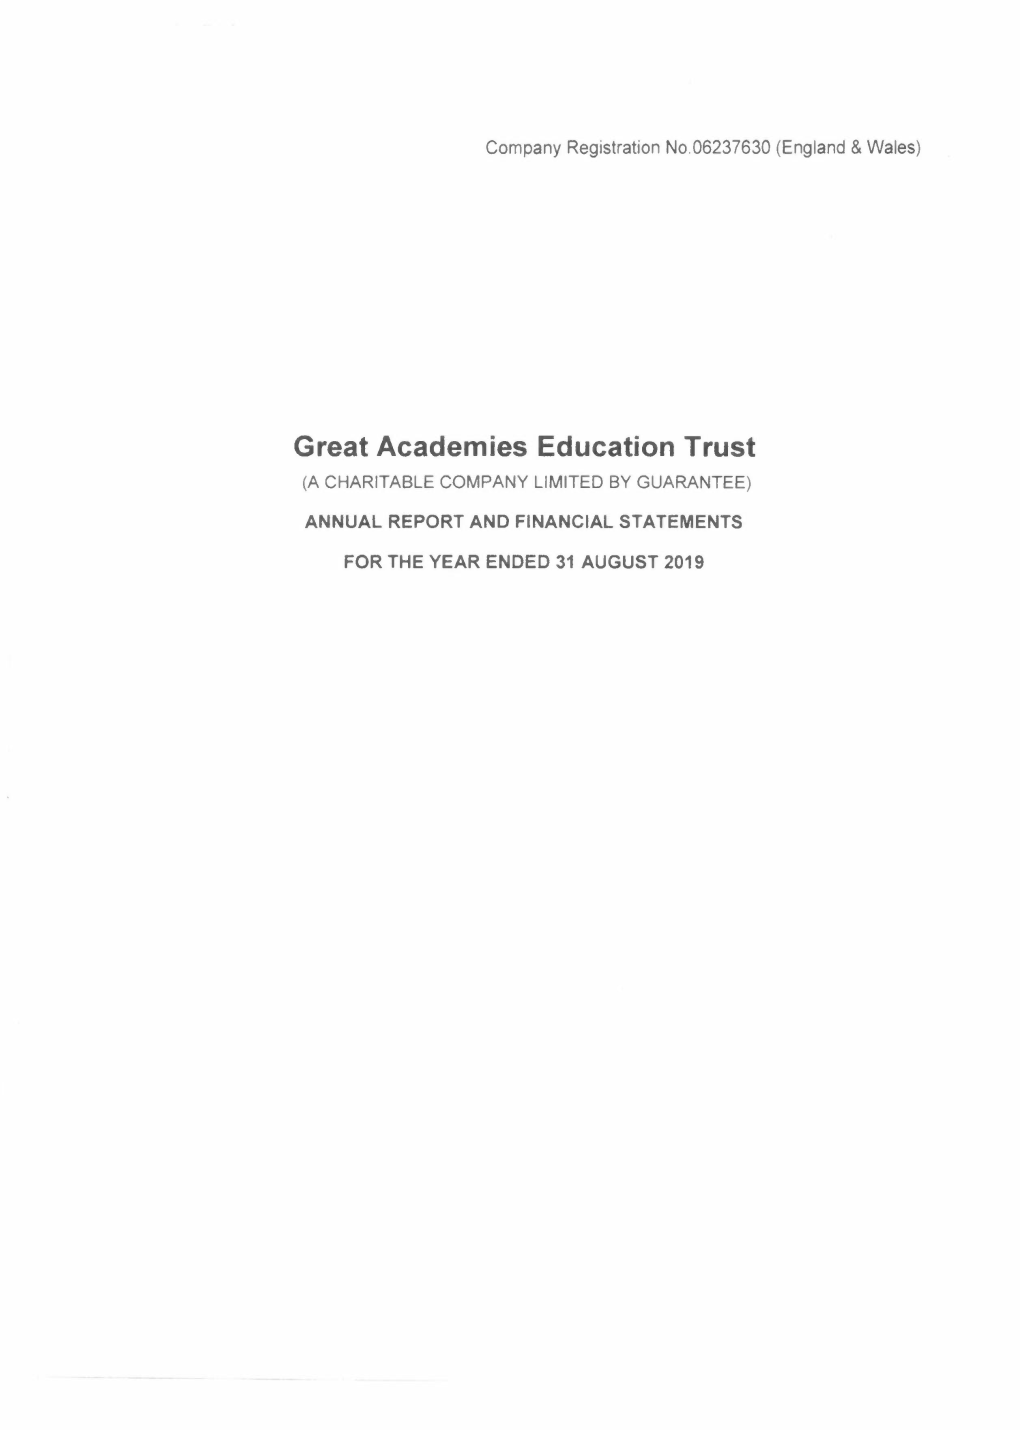 Great Academies Education Trust (A CHARITABLE COMPANY LIMITED by GUARANTEE)